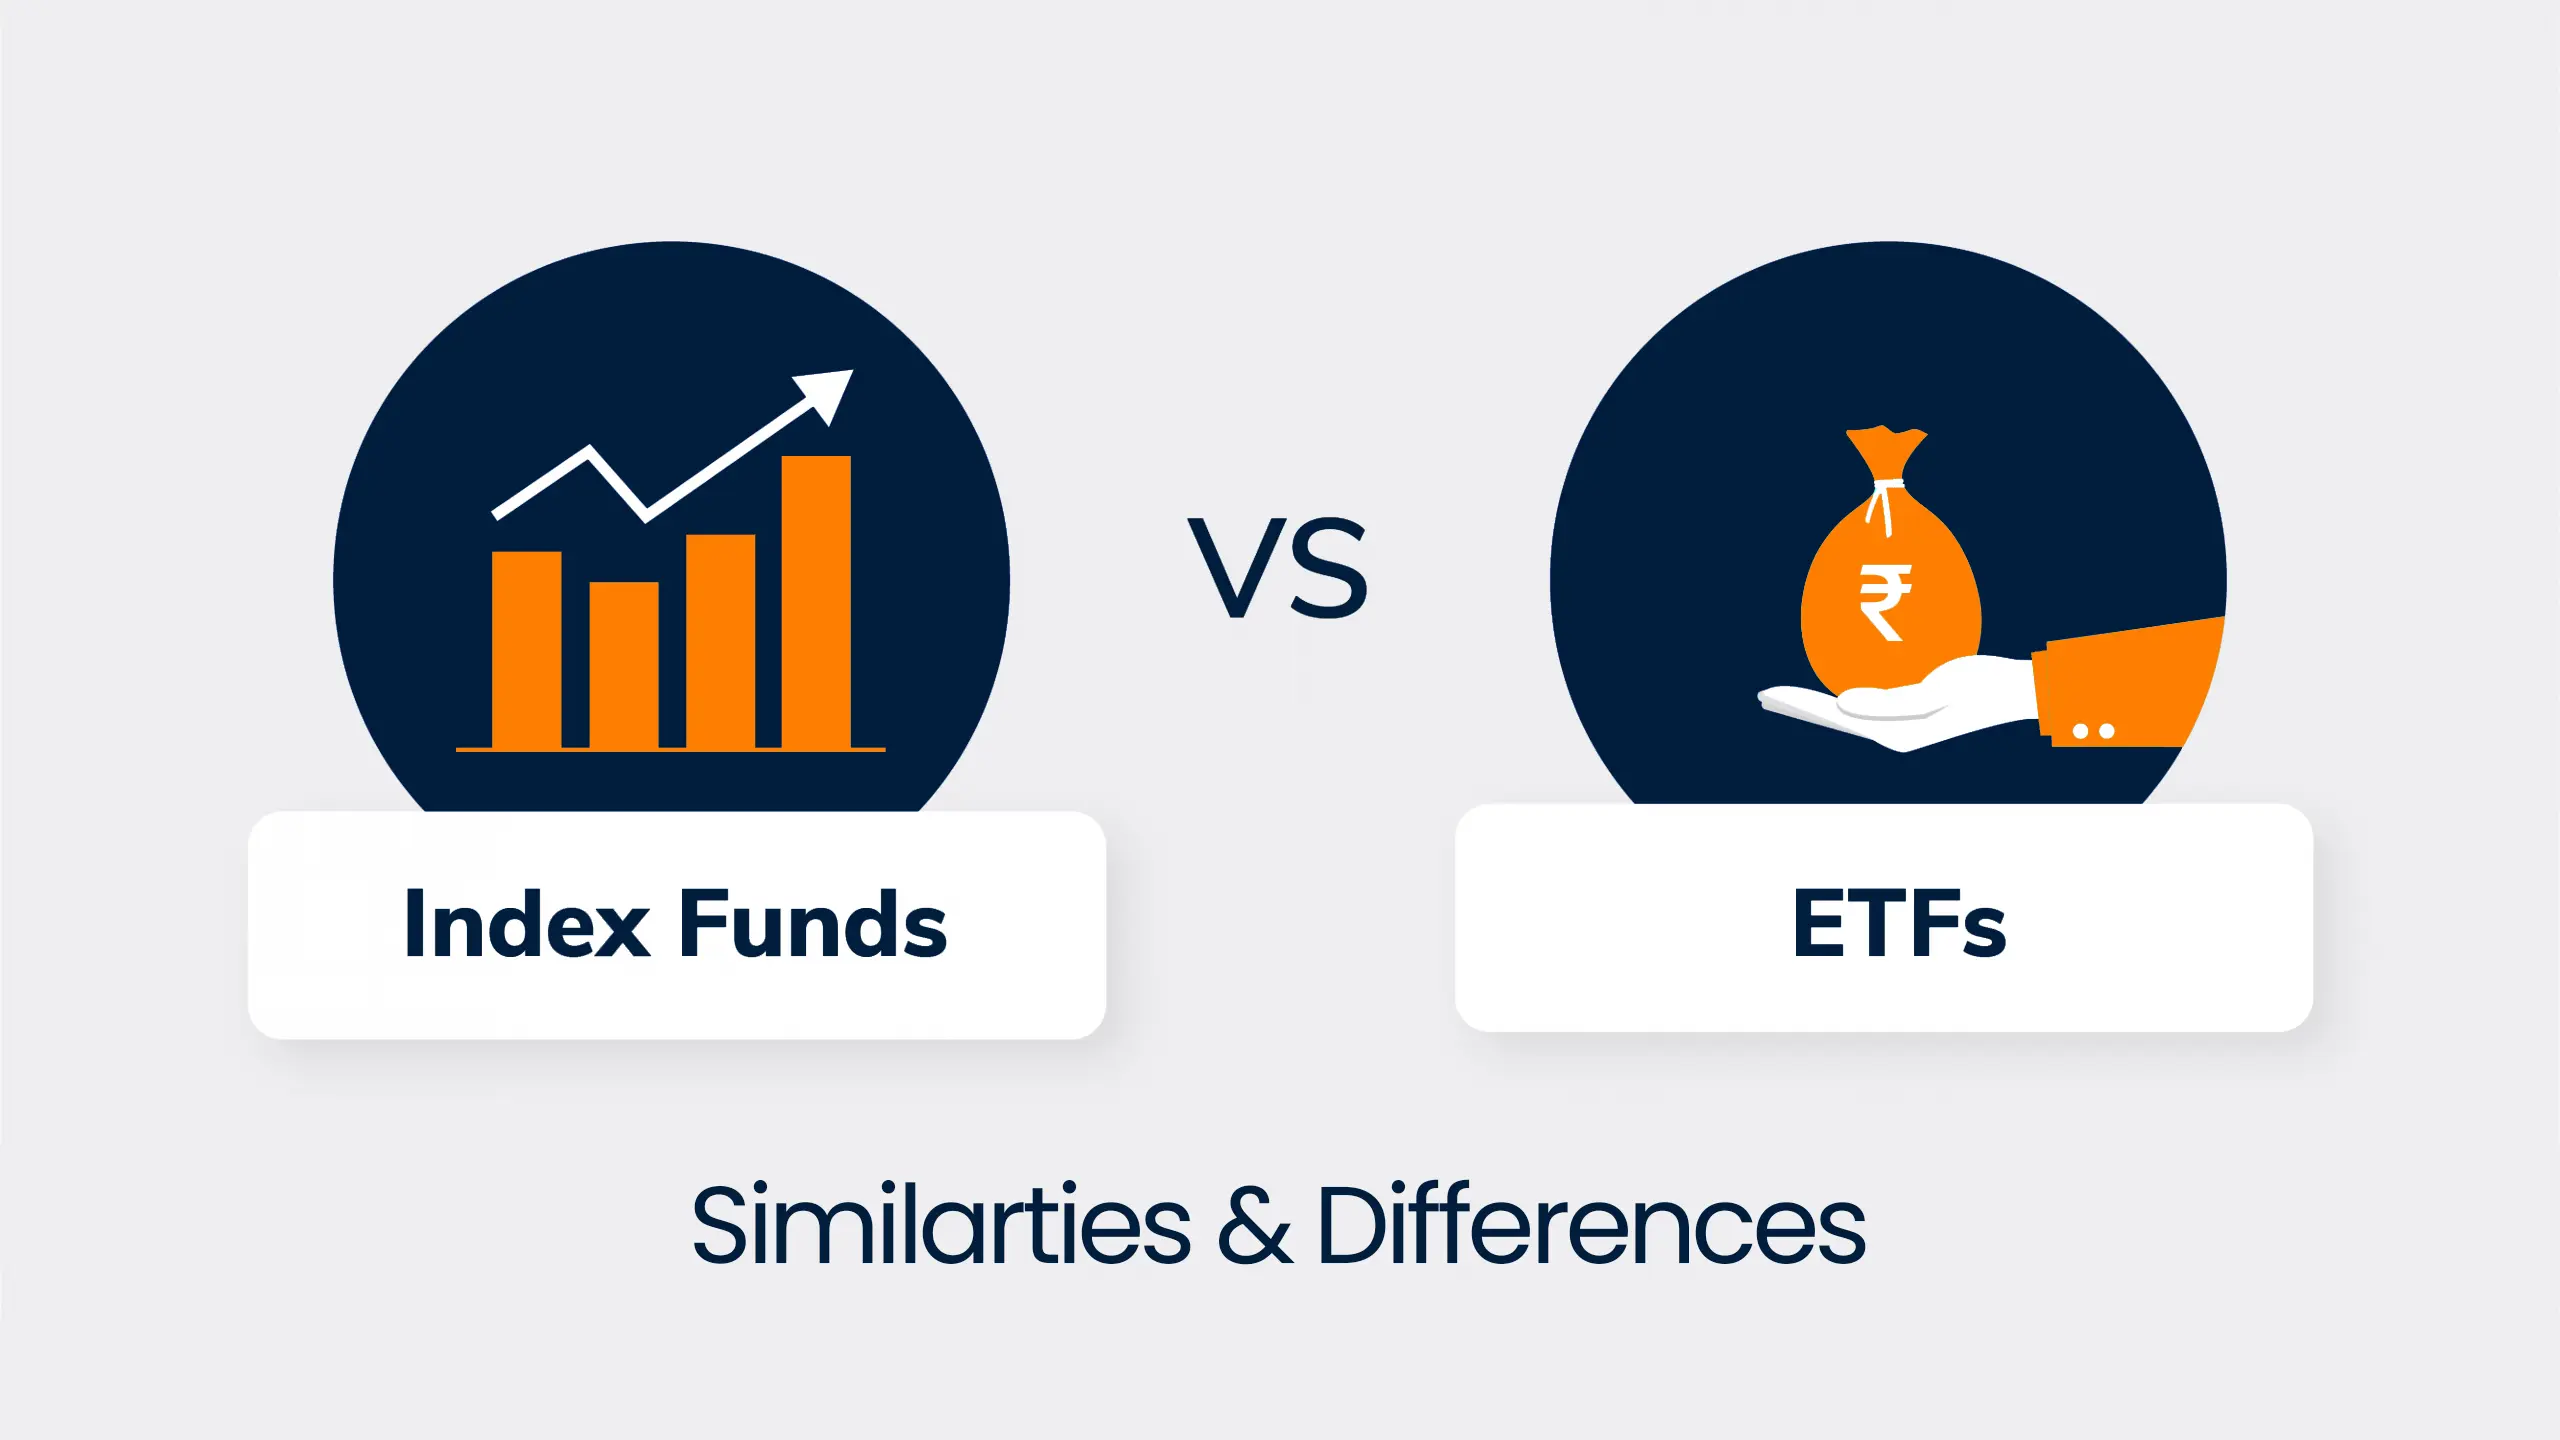 Index funds vs ETFs similarities and differences